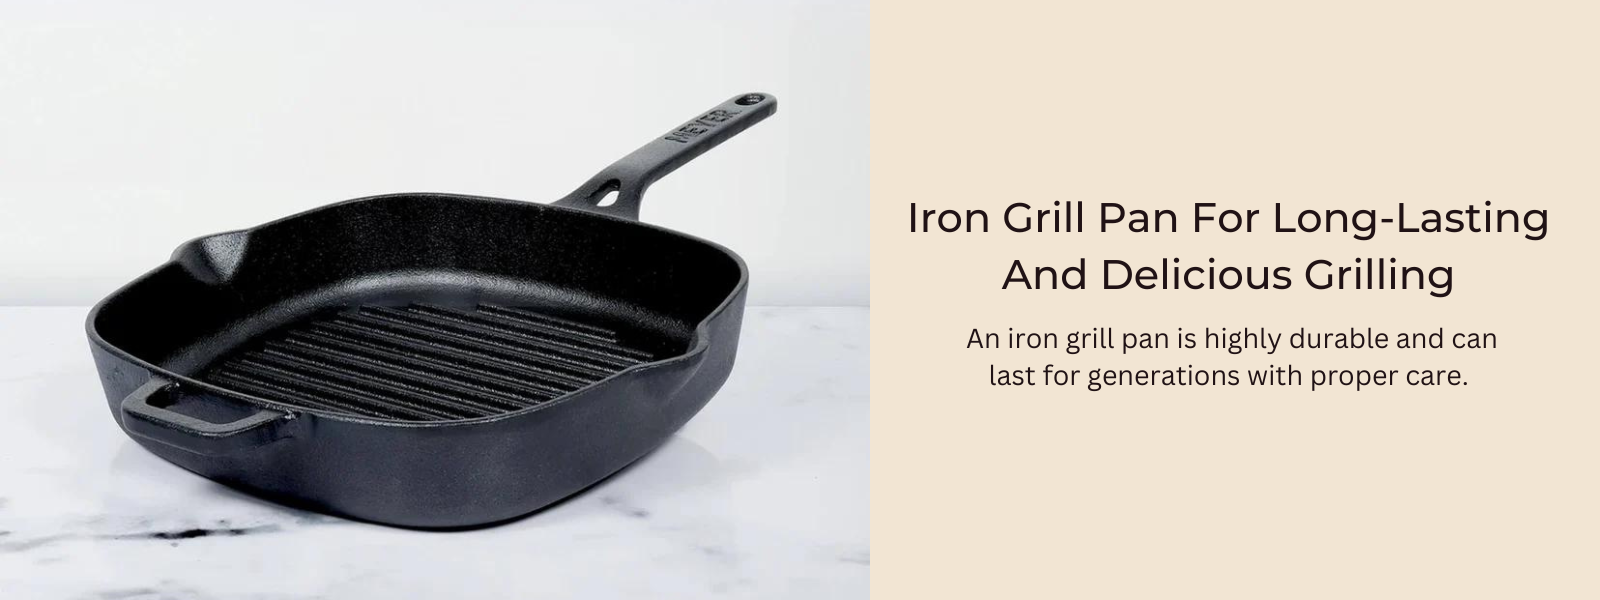 Iron Grill Pan For Long-Lasting And Delicious Grilling